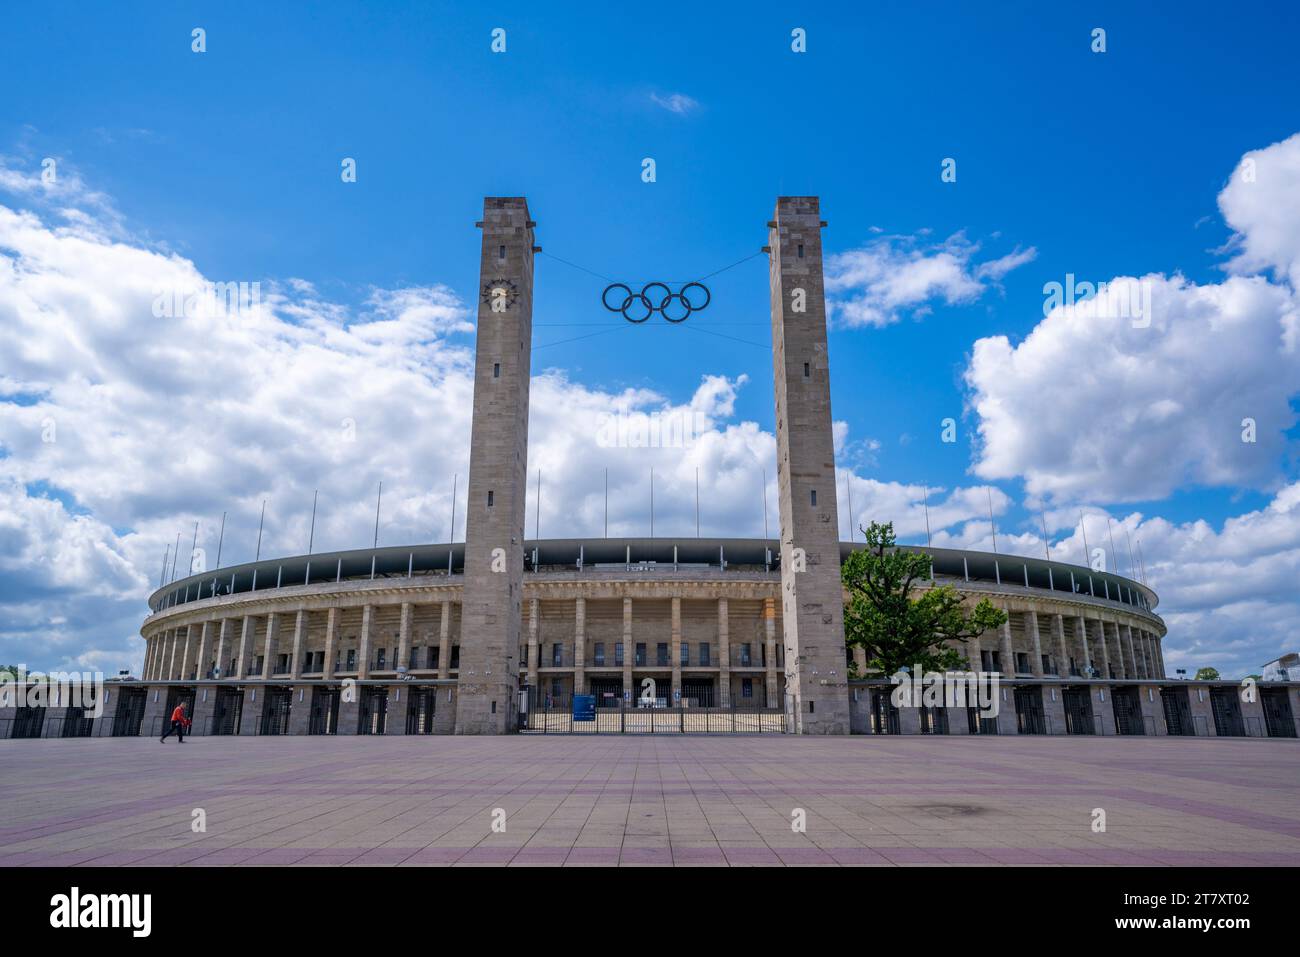 View of exterior of Olympiastadion Berlin, built for the 1936 Olympics, Berlin, Germany, Europe Stock Photo